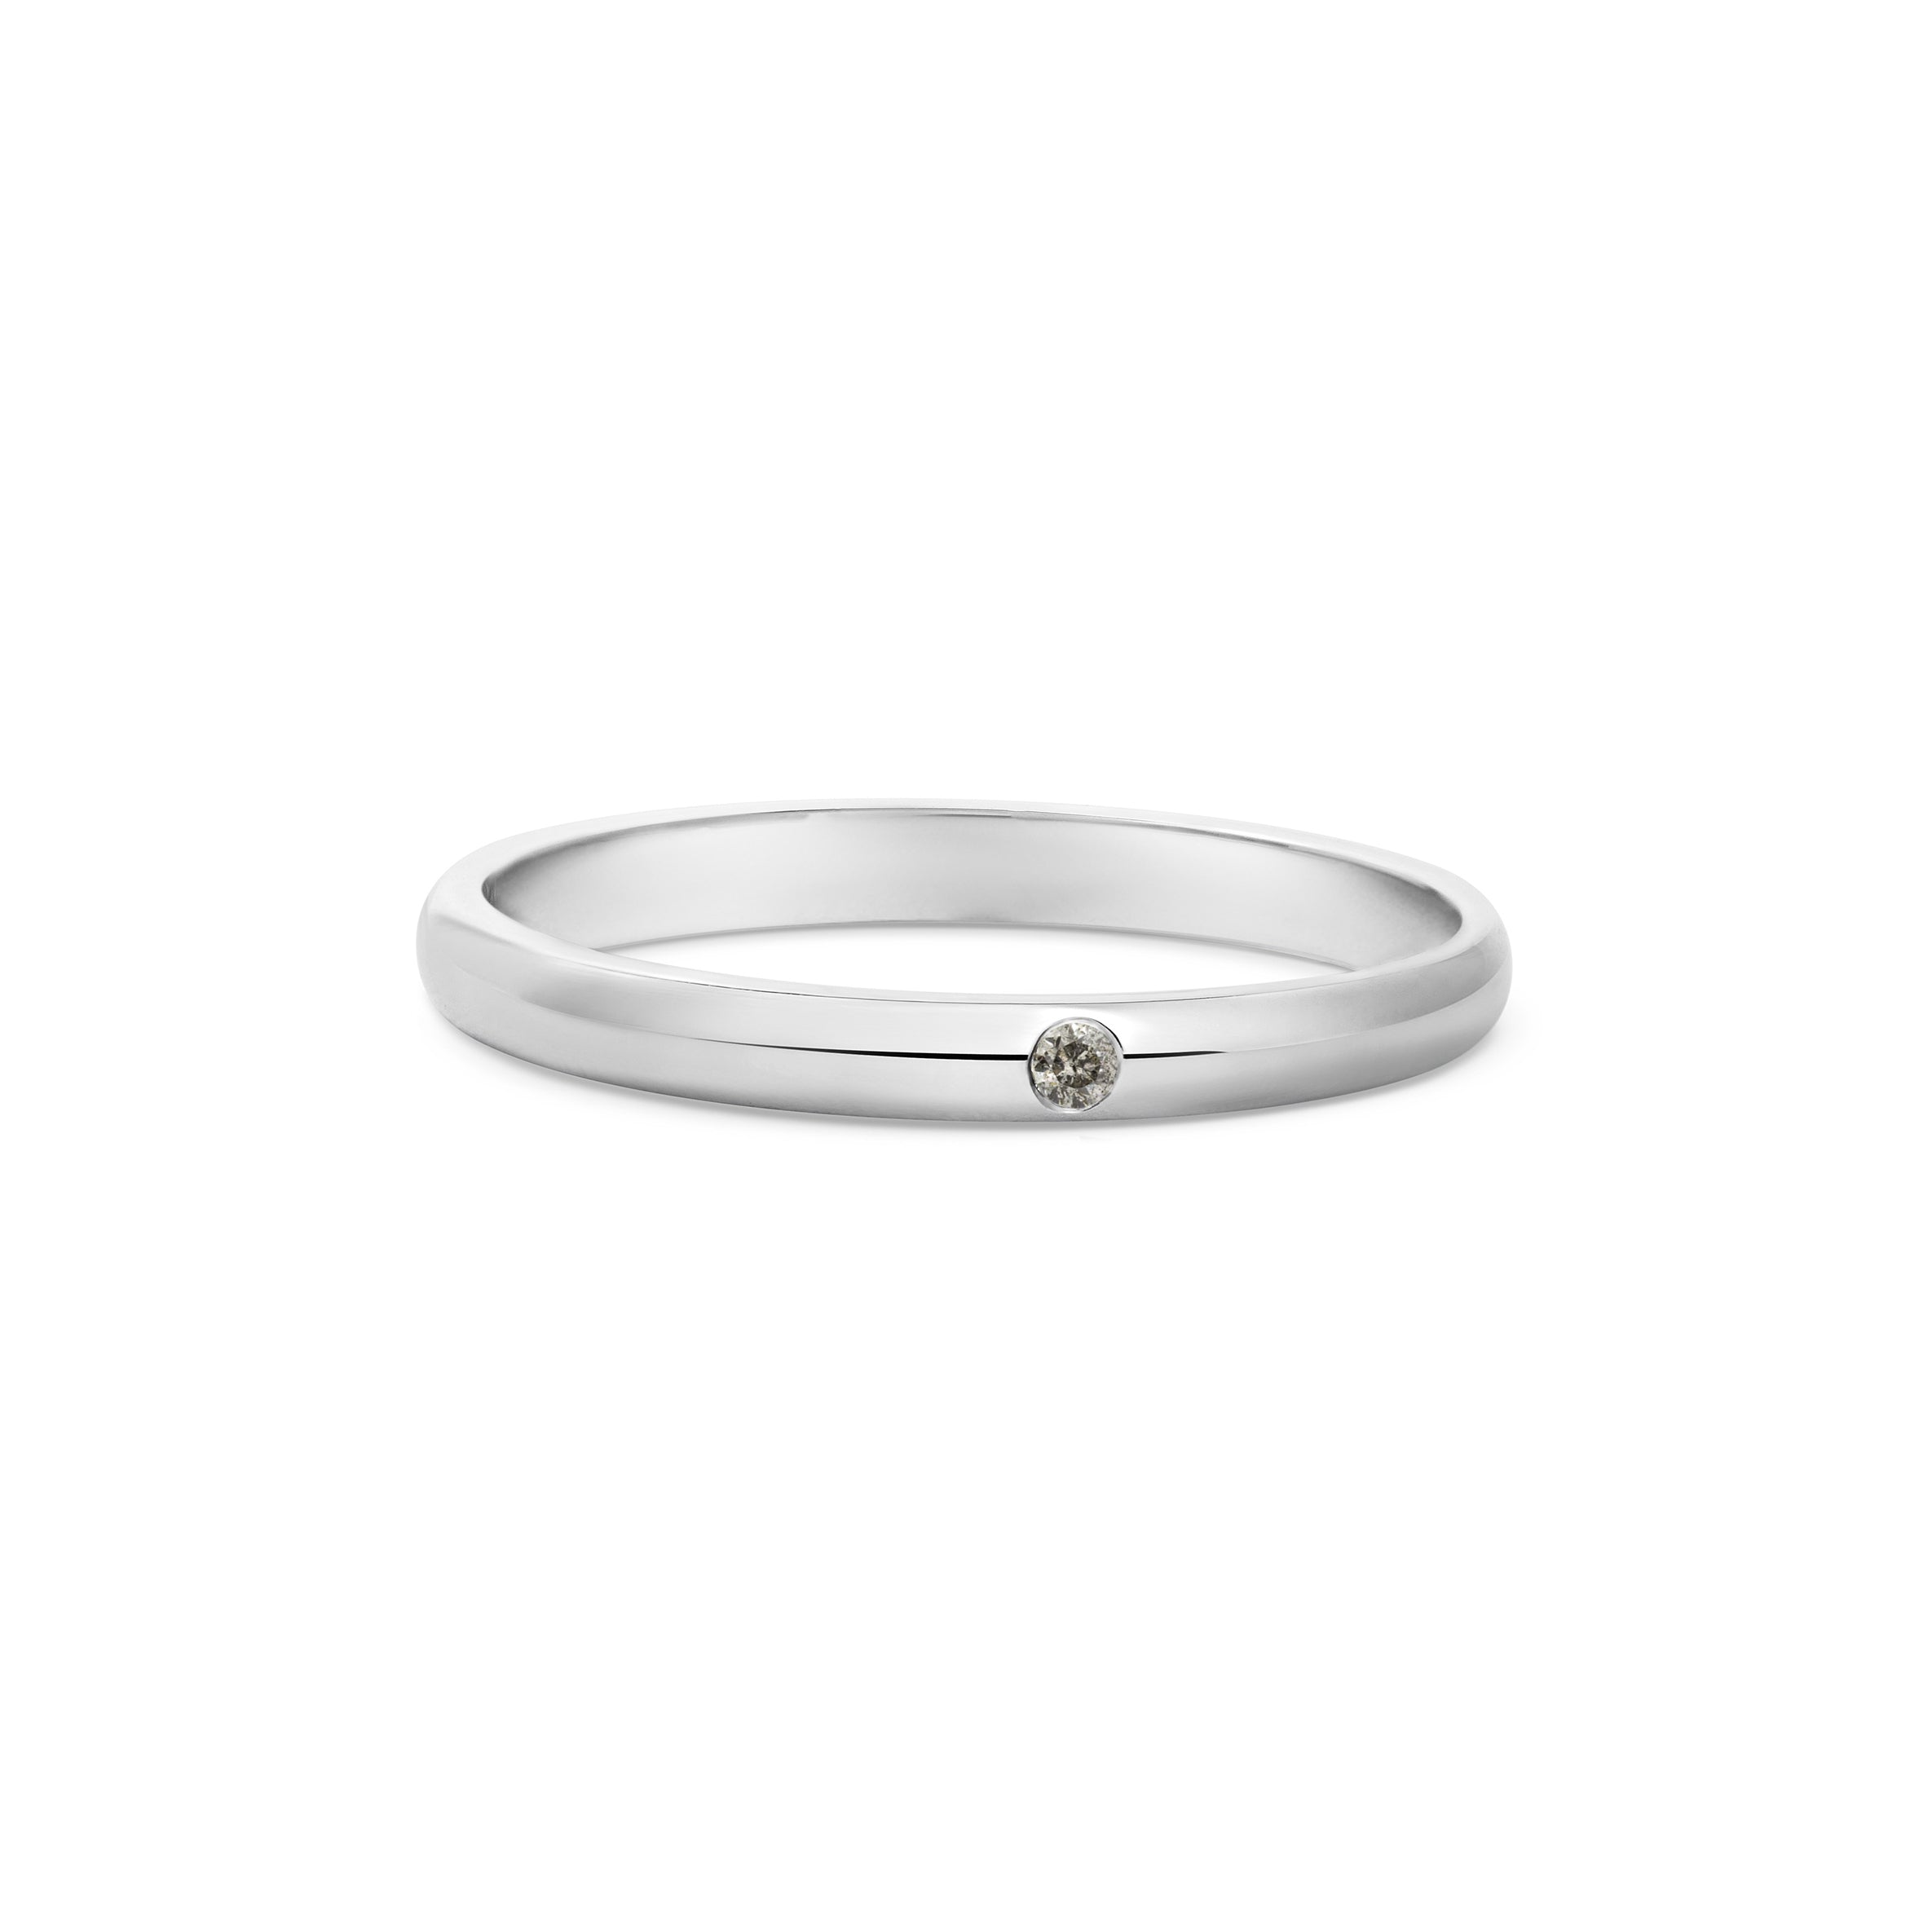 The Grey Unum Ring by East London jeweller Rachel Boston | Discover our collections of unique and timeless engagement rings, wedding rings, and modern fine jewellery.